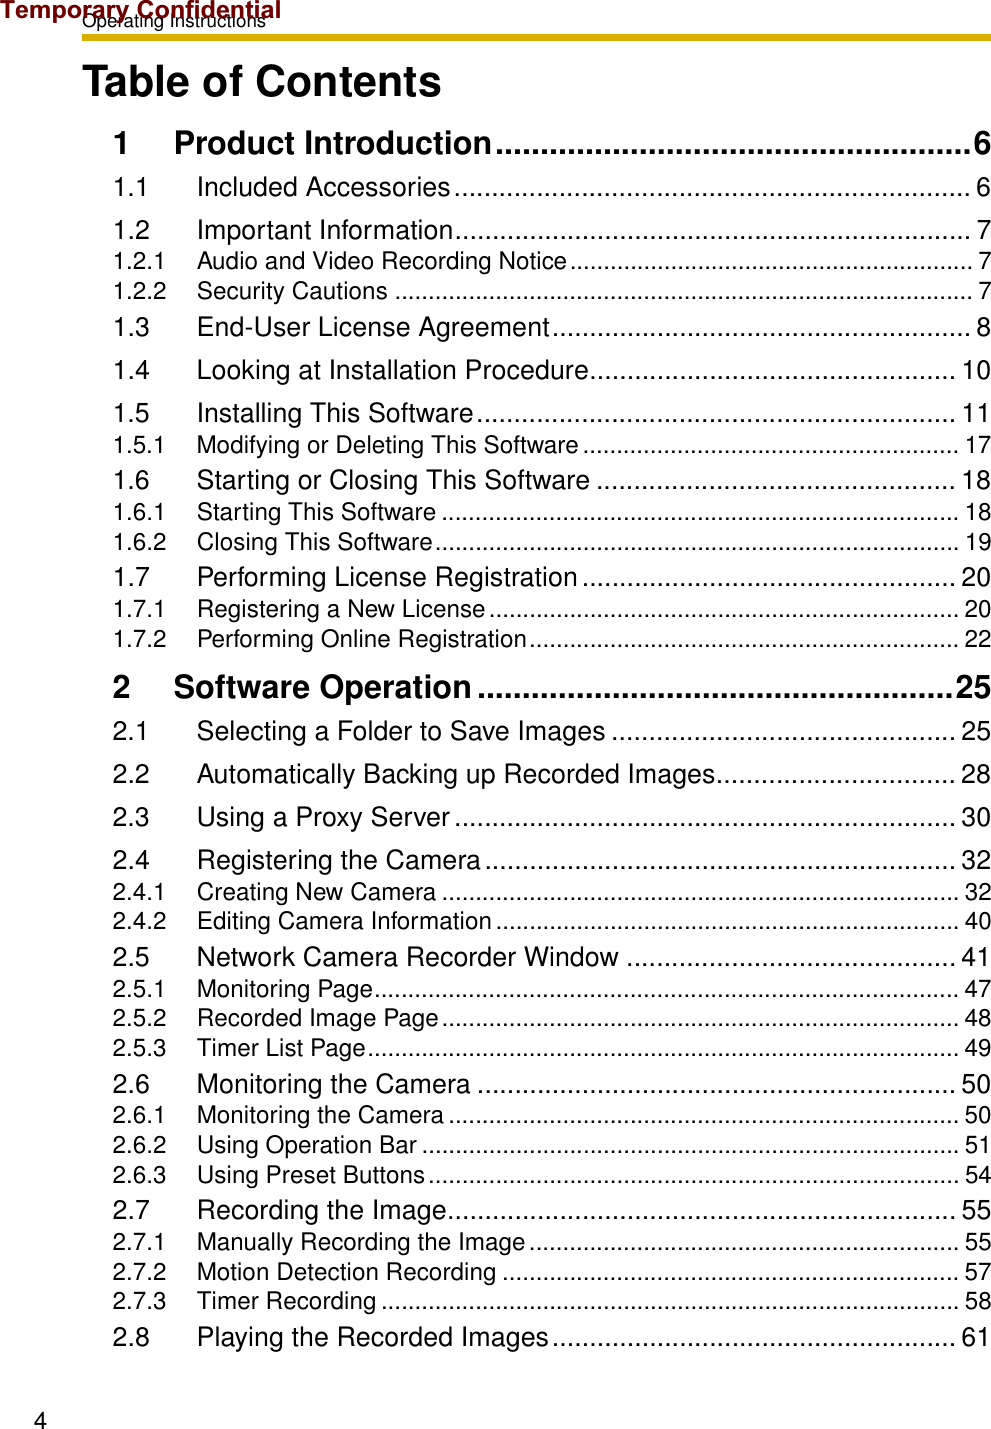 Operating Instructions4Table of Contents1 Product Introduction.....................................................61.1 Included Accessories..................................................................... 61.2 Important Information..................................................................... 71.2.1 Audio and Video Recording Notice............................................................ 71.2.2 Security Cautions ...................................................................................... 71.3 End-User License Agreement........................................................ 81.4 Looking at Installation Procedure................................................. 101.5 Installing This Software................................................................ 111.5.1 Modifying or Deleting This Software........................................................ 171.6 Starting or Closing This Software ................................................ 181.6.1 Starting This Software ............................................................................. 181.6.2 Closing This Software.............................................................................. 191.7 Performing License Registration .................................................. 201.7.1 Registering a New License...................................................................... 201.7.2 Performing Online Registration................................................................ 222 Software Operation.....................................................252.1 Selecting a Folder to Save Images .............................................. 252.2 Automatically Backing up Recorded Images................................ 282.3 Using a Proxy Server................................................................... 302.4 Registering the Camera............................................................... 322.4.1 Creating New Camera ............................................................................. 322.4.2 Editing Camera Information ..................................................................... 402.5 Network Camera Recorder Window ............................................ 412.5.1 Monitoring Page....................................................................................... 472.5.2 Recorded Image Page............................................................................. 482.5.3 Timer List Page........................................................................................ 492.6 Monitoring the Camera ................................................................ 502.6.1 Monitoring the Camera ............................................................................ 502.6.2 Using Operation Bar ................................................................................ 512.6.3 Using Preset Buttons............................................................................... 542.7 Recording the Image.................................................................... 552.7.1 Manually Recording the Image................................................................ 552.7.2 Motion Detection Recording .................................................................... 572.7.3 Timer Recording ...................................................................................... 582.8 Playing the Recorded Images...................................................... 61Temporary Confidential